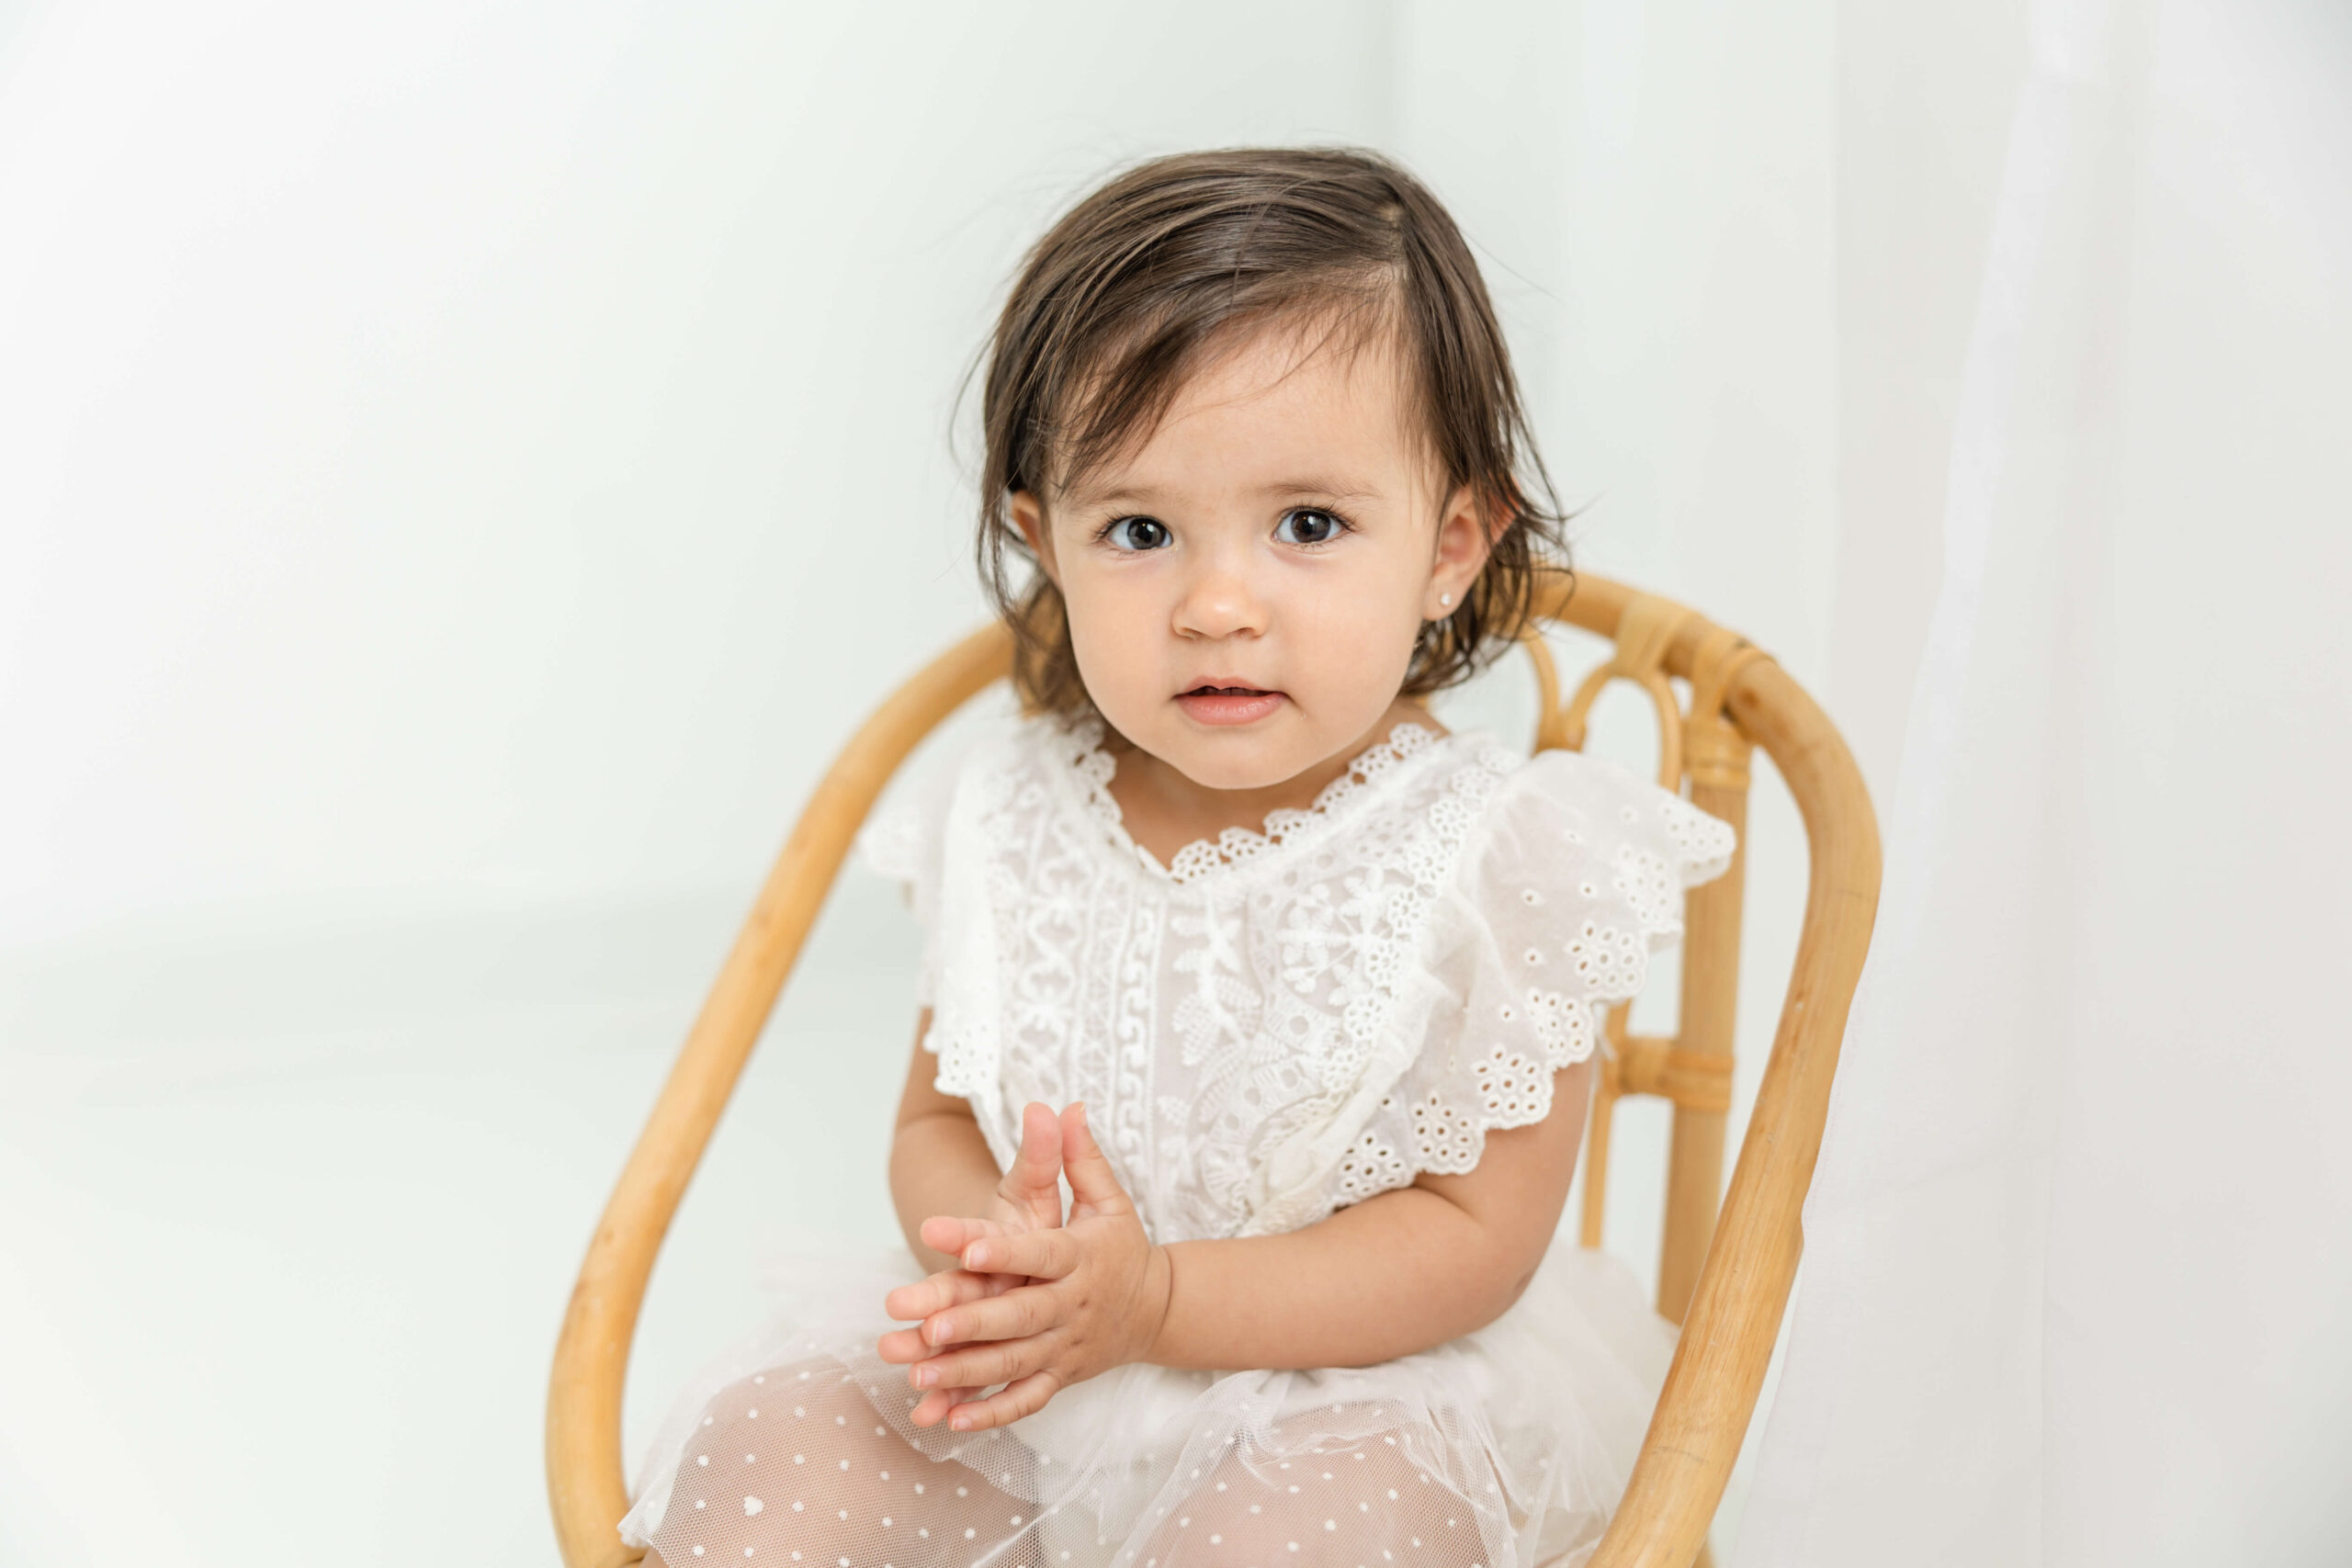 One year old baby girl clapping her hands during her augusta motherhood session.